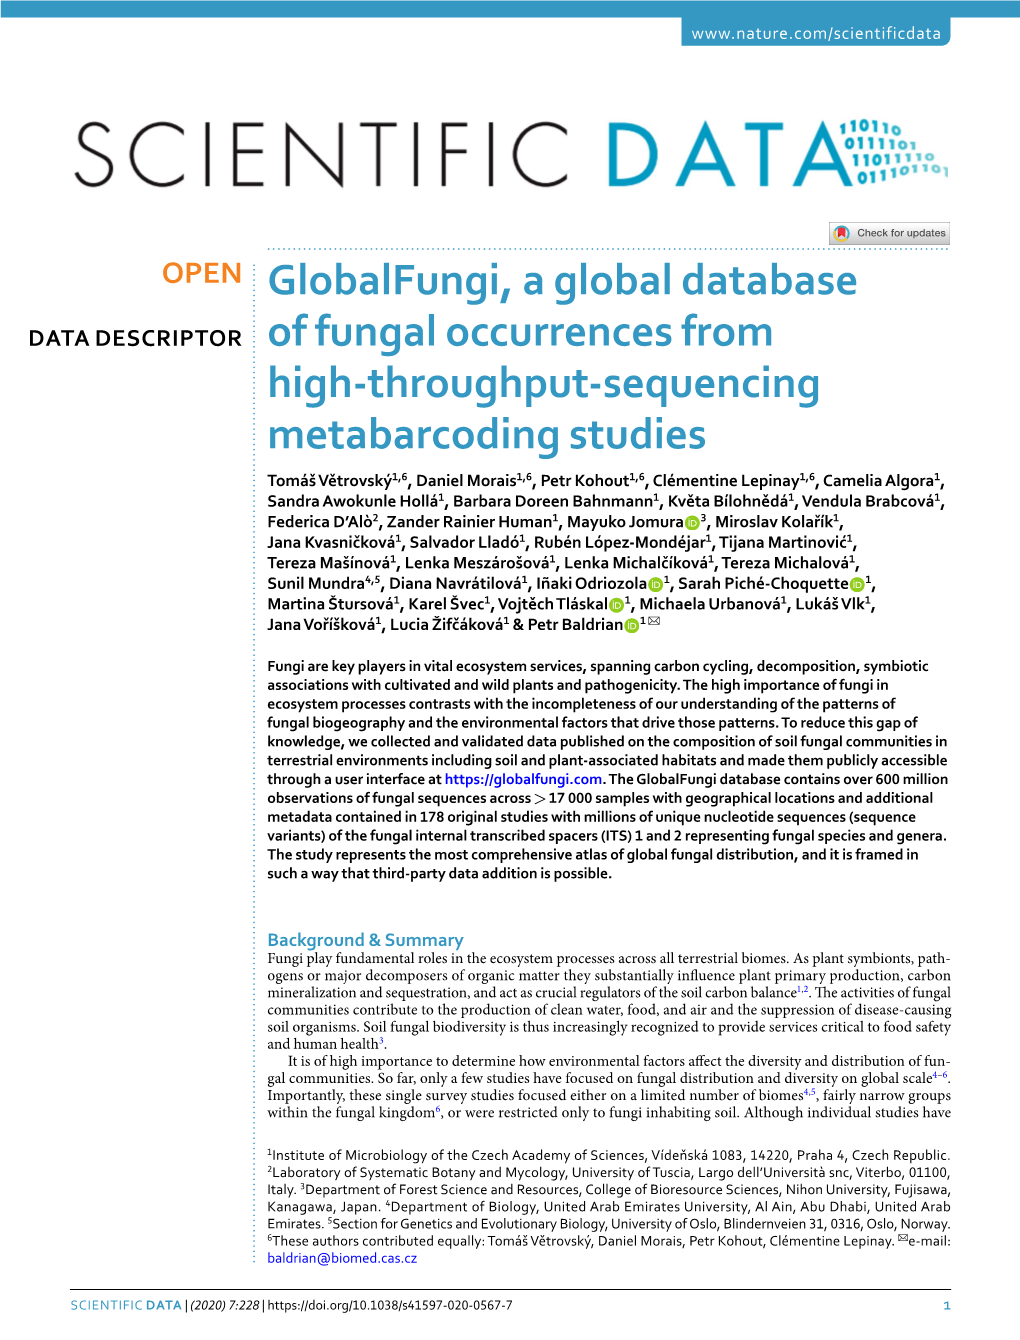 Globalfungi, a Global Database of Fungal Occurrences from High